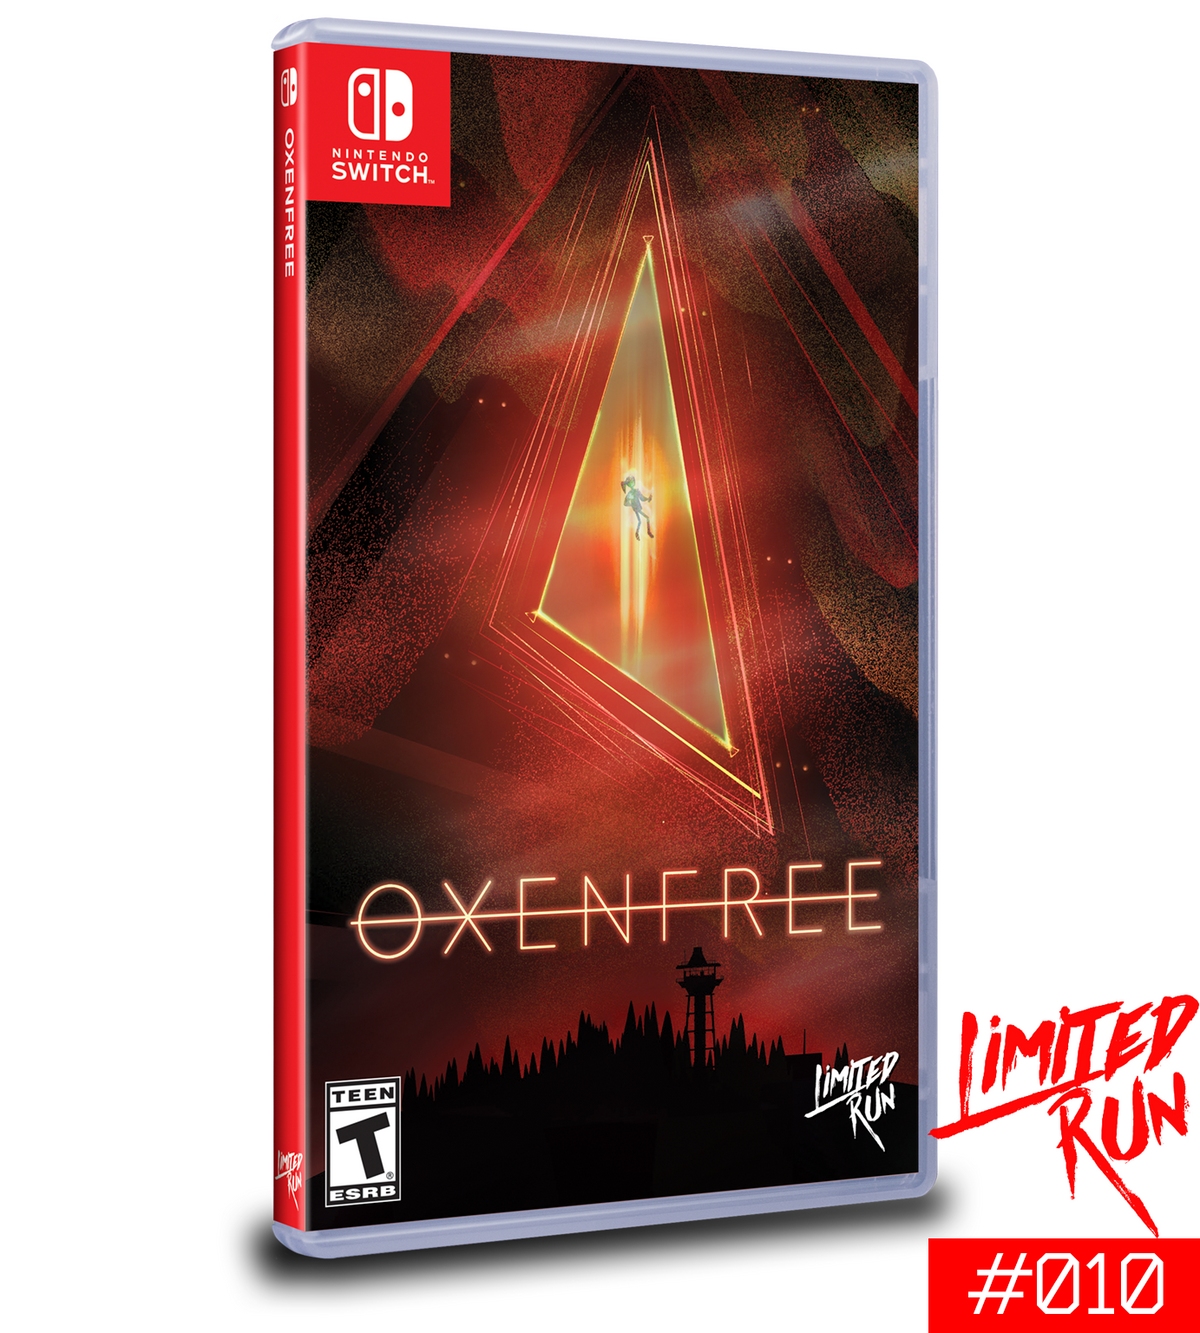 Switch Limited Run #10: Oxenfree